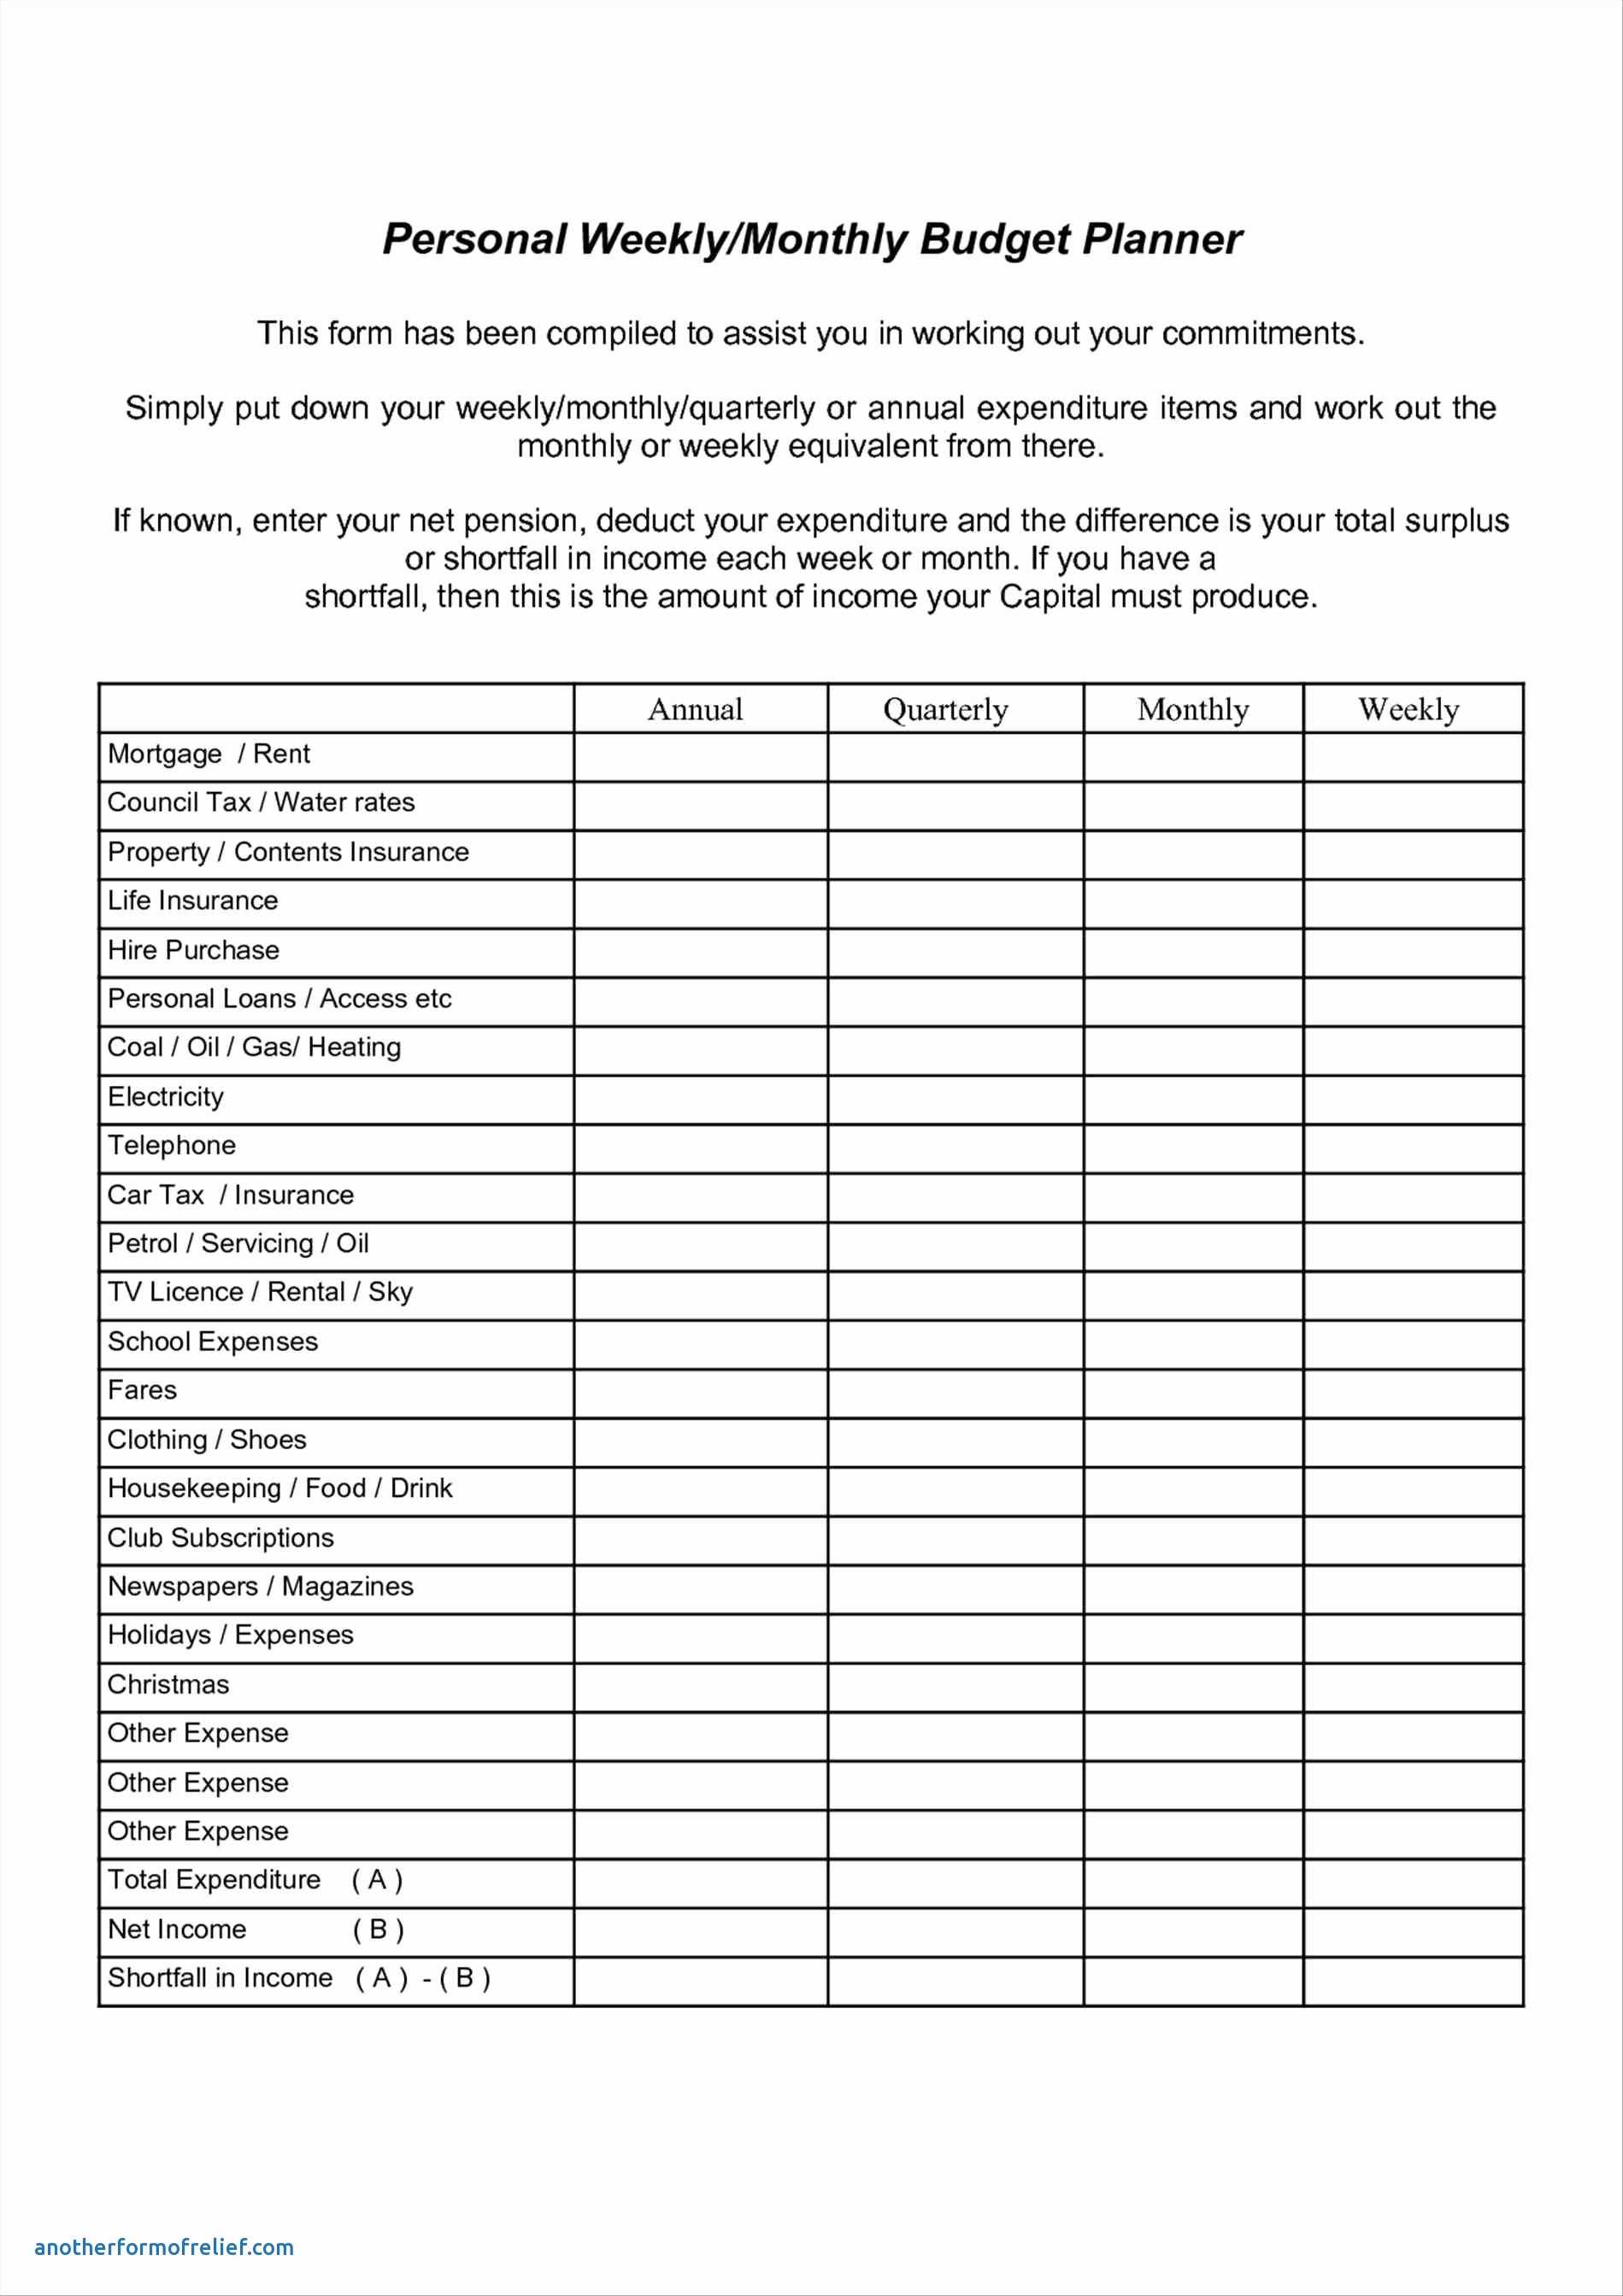 Tax organizer Worksheet for Small Business with Tax organizer Worksheet for Small Business Awesome 288 Best Business